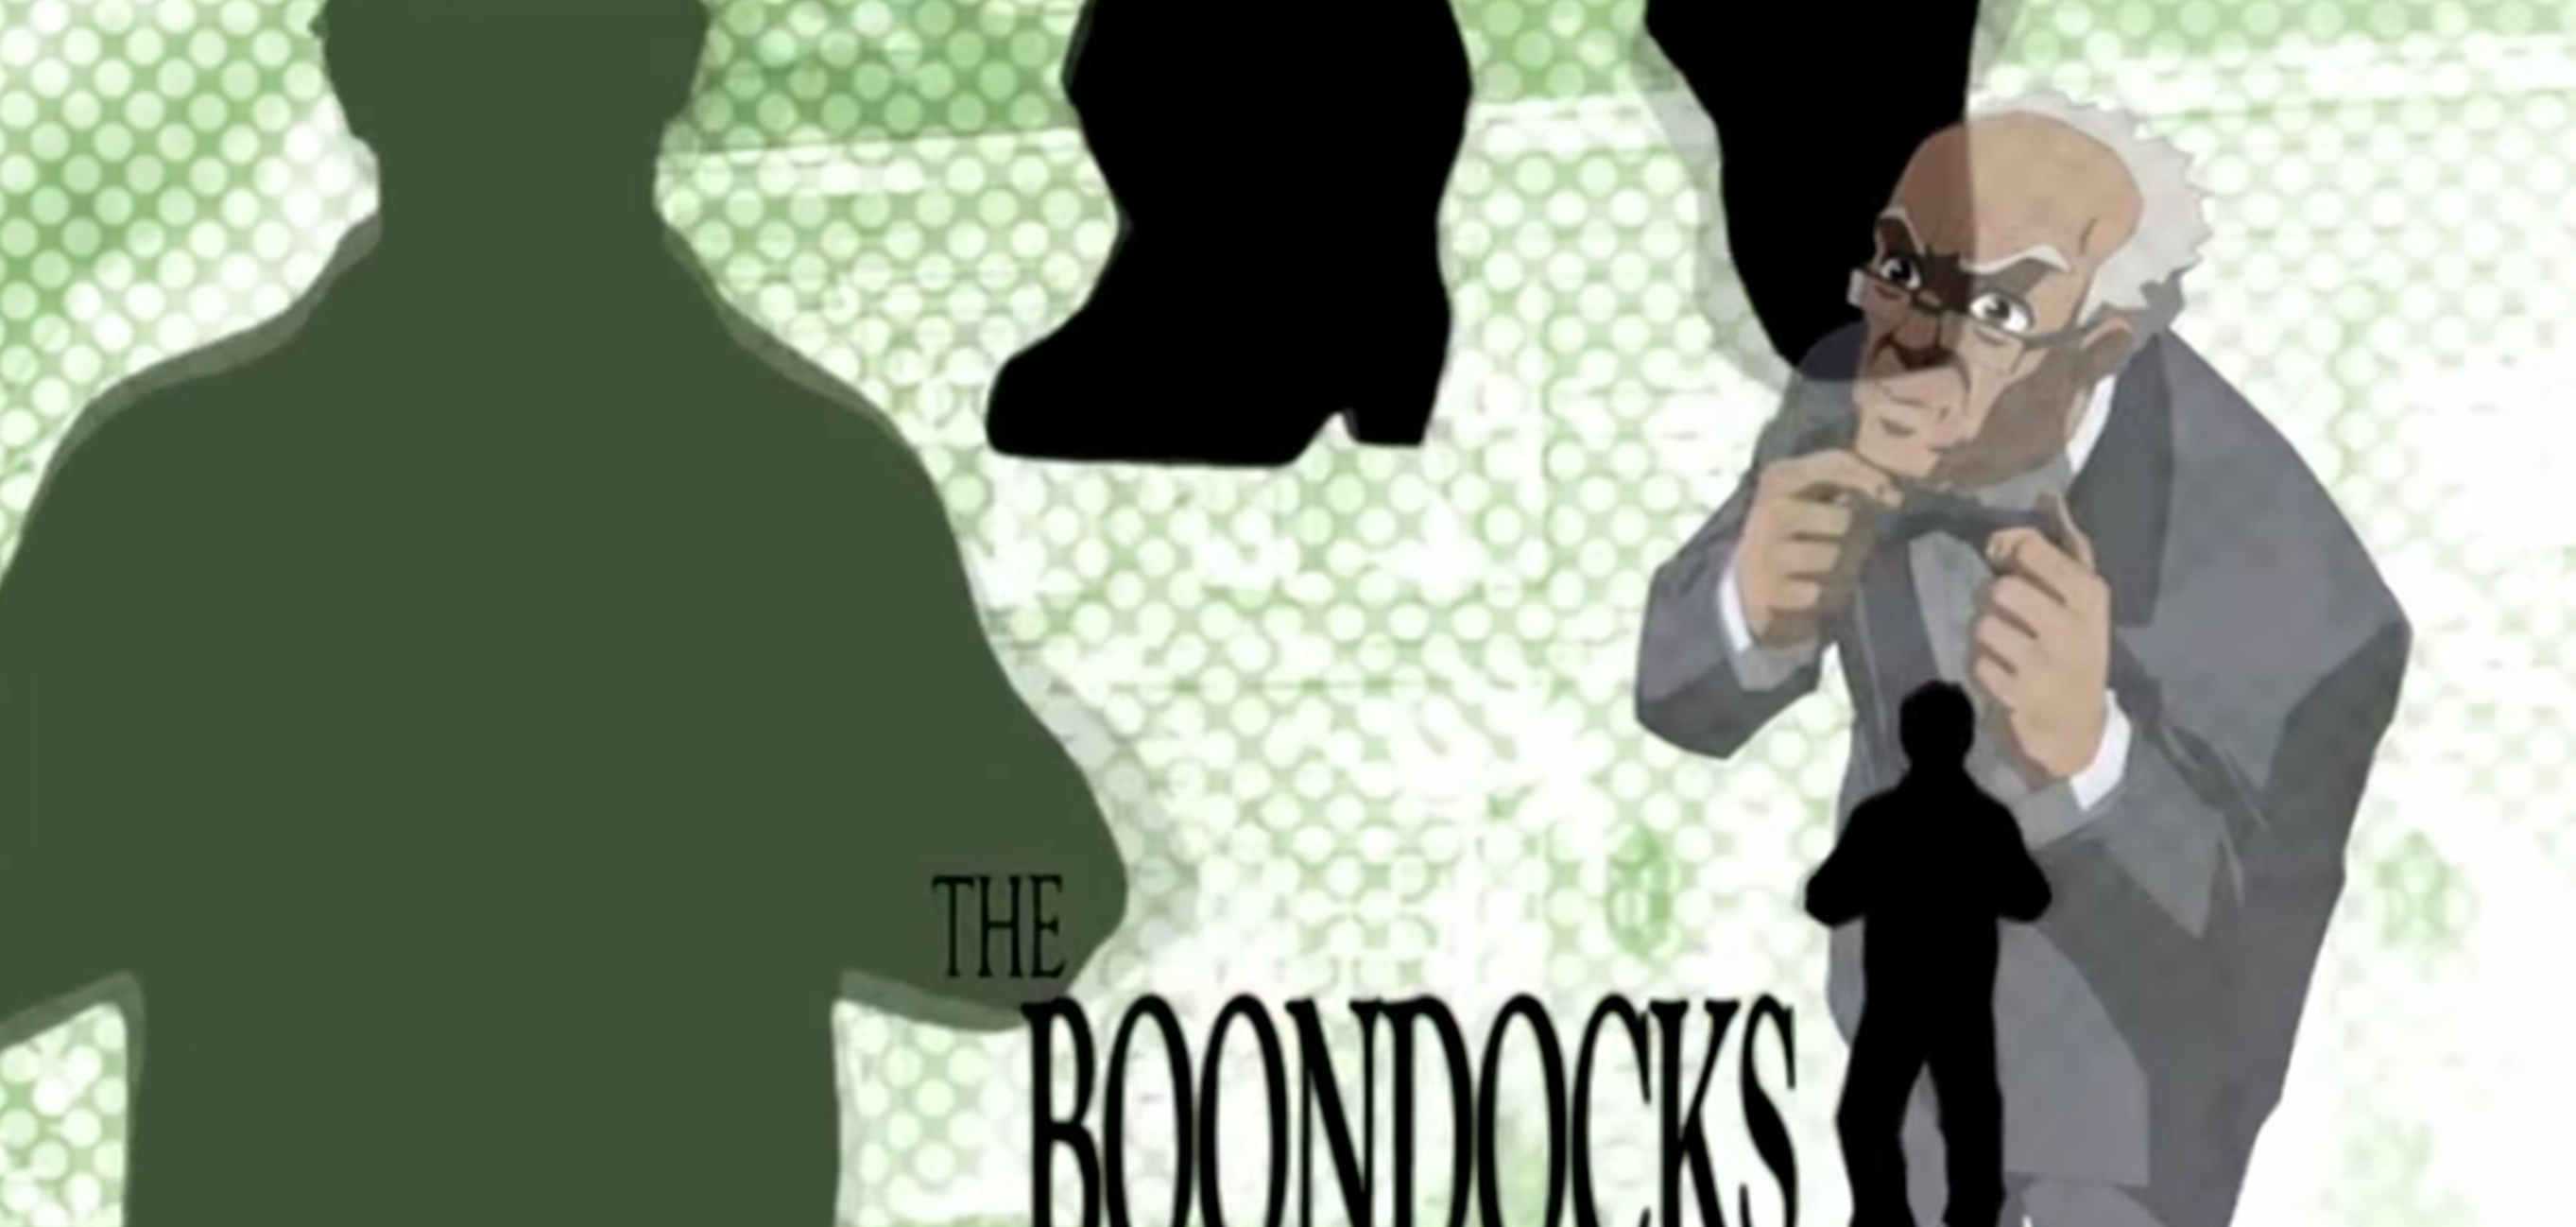 Where Can I Watch 'The Boondocks'? HBO Max Has the Whole Series